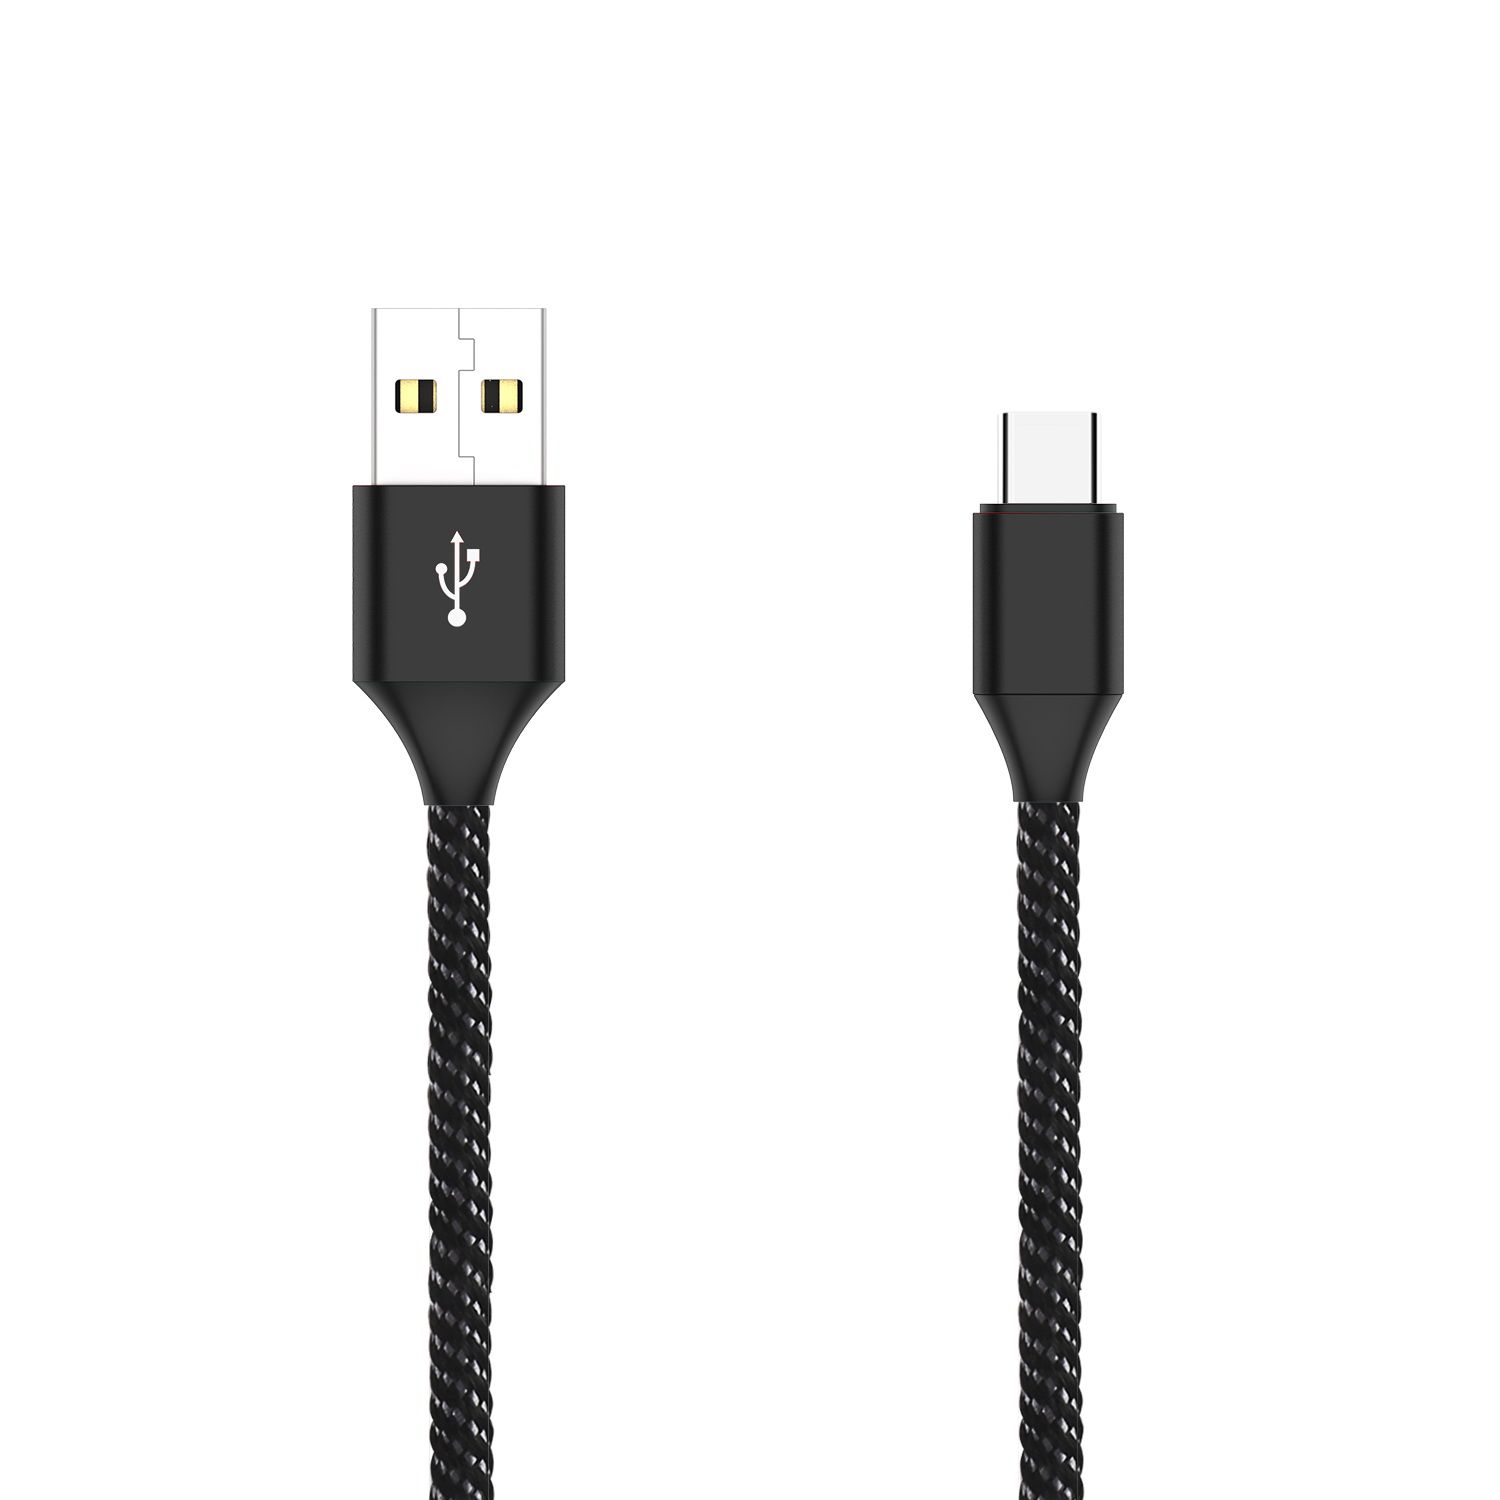 Bemz USB Cable Compatible with LG K51, Heavy Duty Nylon Braided USB Type-C (USB-C to USB-A) Cable and Atom Wipe - 6.5 Feet (2 Meters) - Black - image 5 of 6